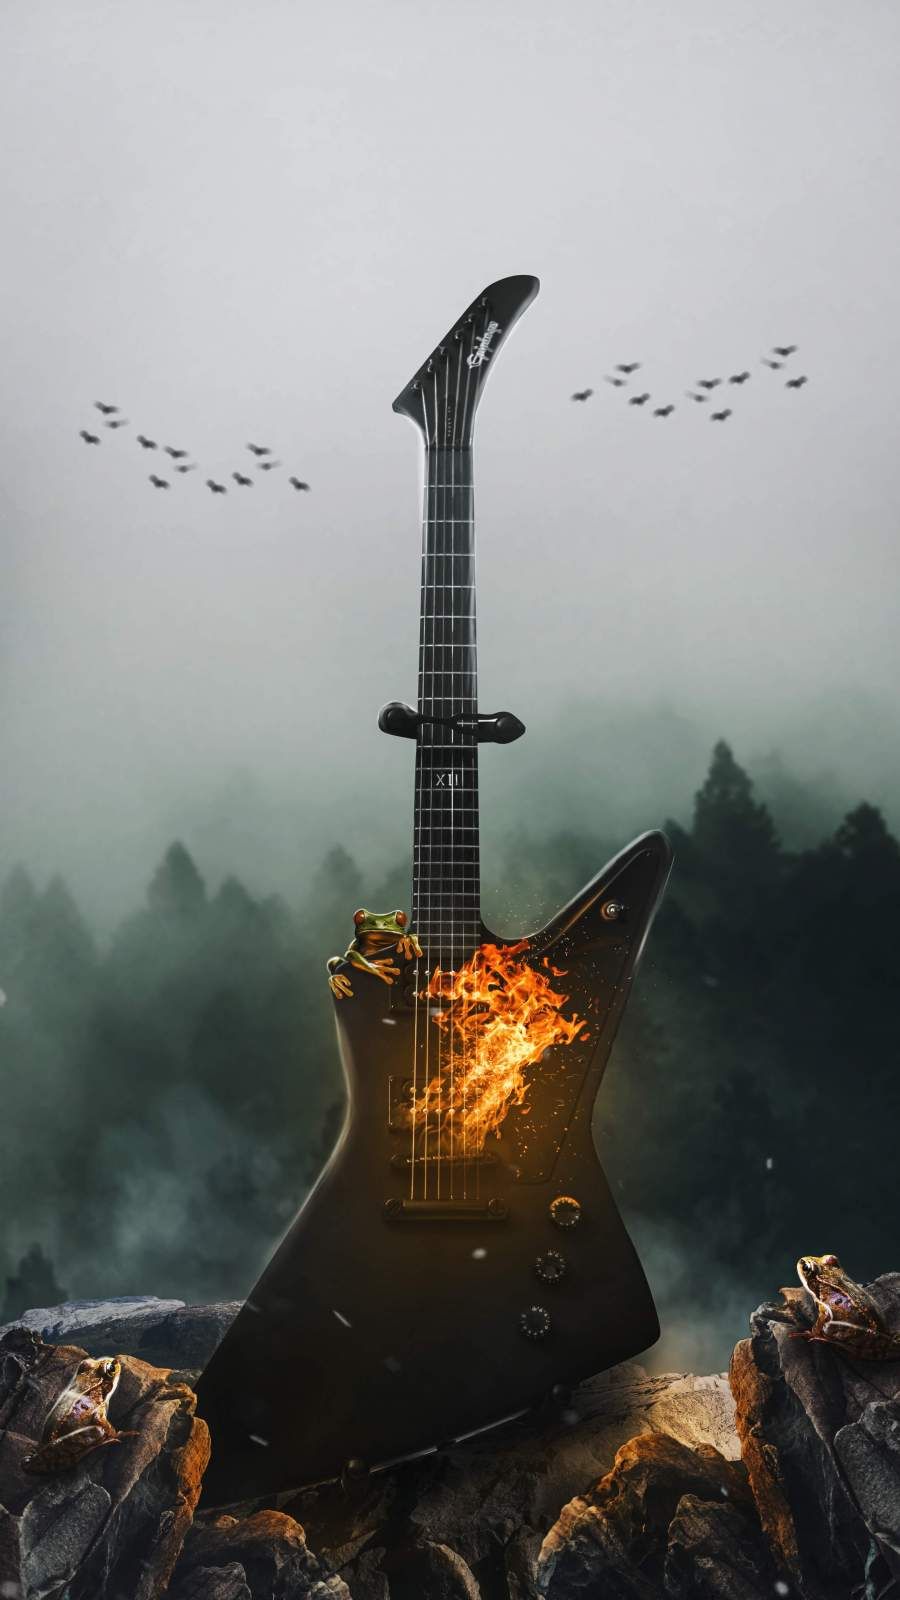 iPhone Wallpaper for iPhone XS, iPhone XR and iPhone X, iPhone Wallpaper. Guitar wallpaper iphone, Phone wallpaper, Guitar